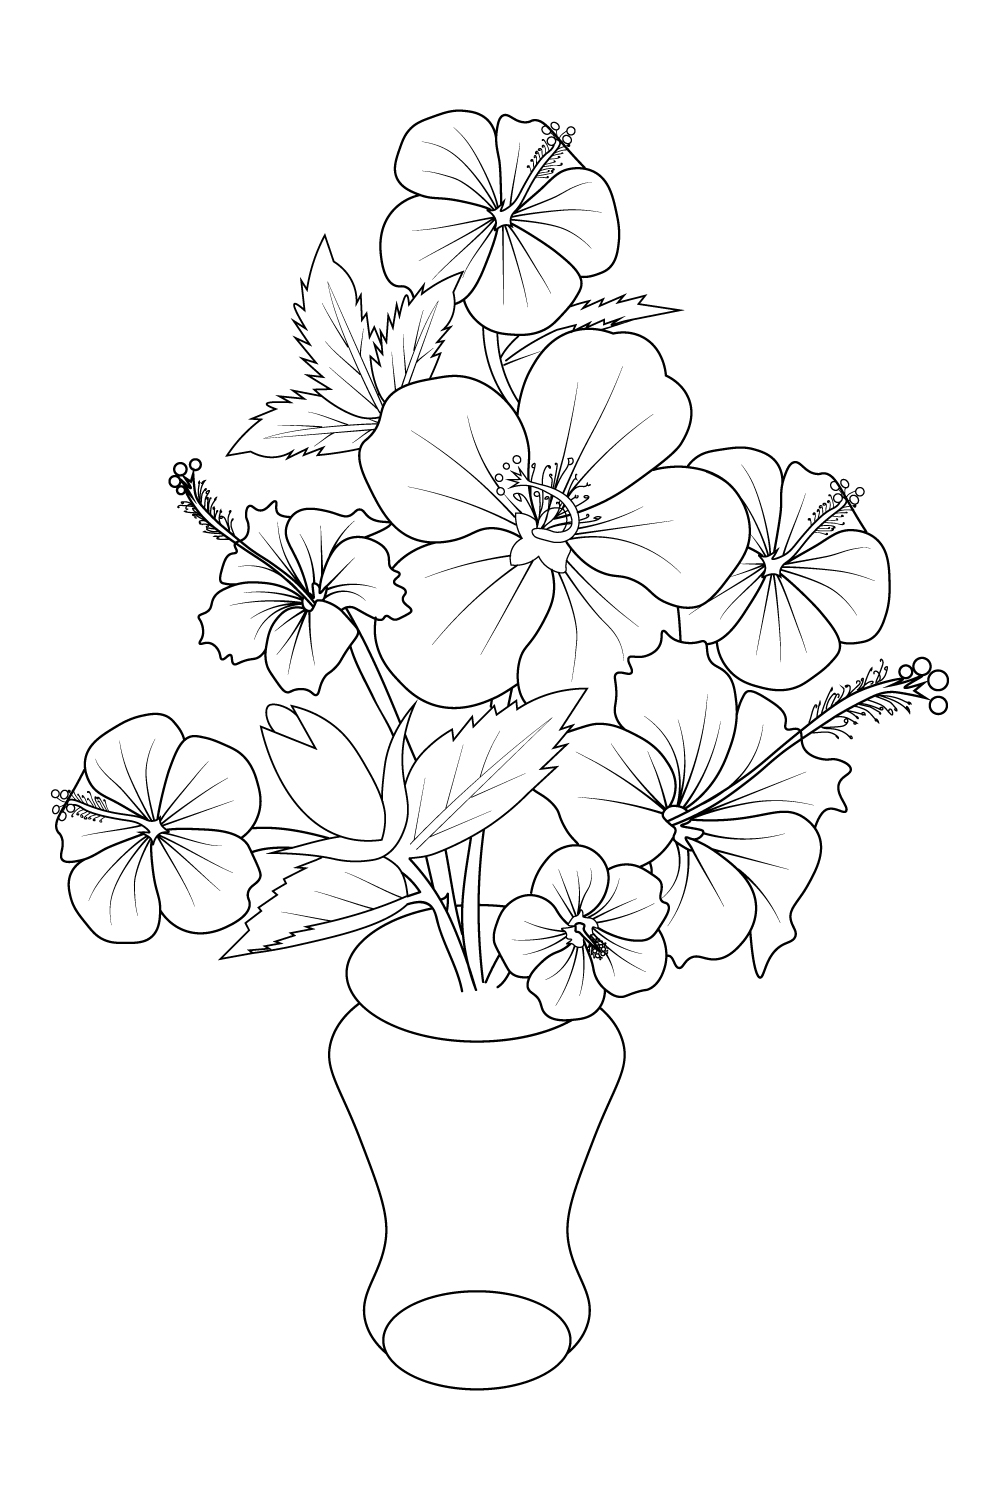 Hibiscus flower coloring pages china rose flower drawing, Realistic hibiscus flower coloring pages pinterest preview image.